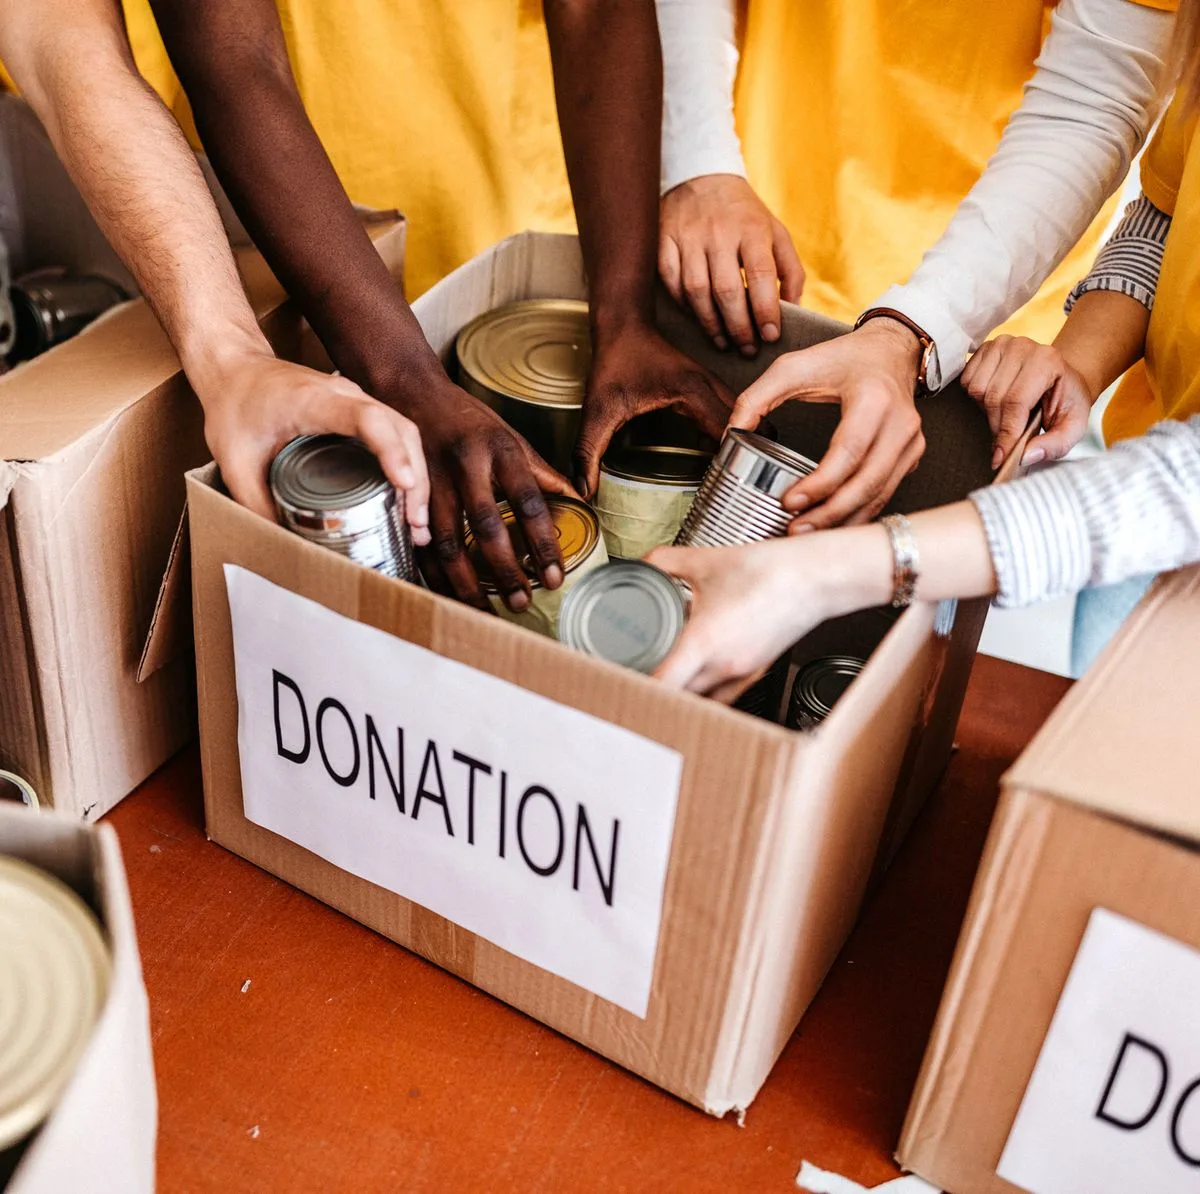 HOW TO GIVE DONATIONS IN UAE.